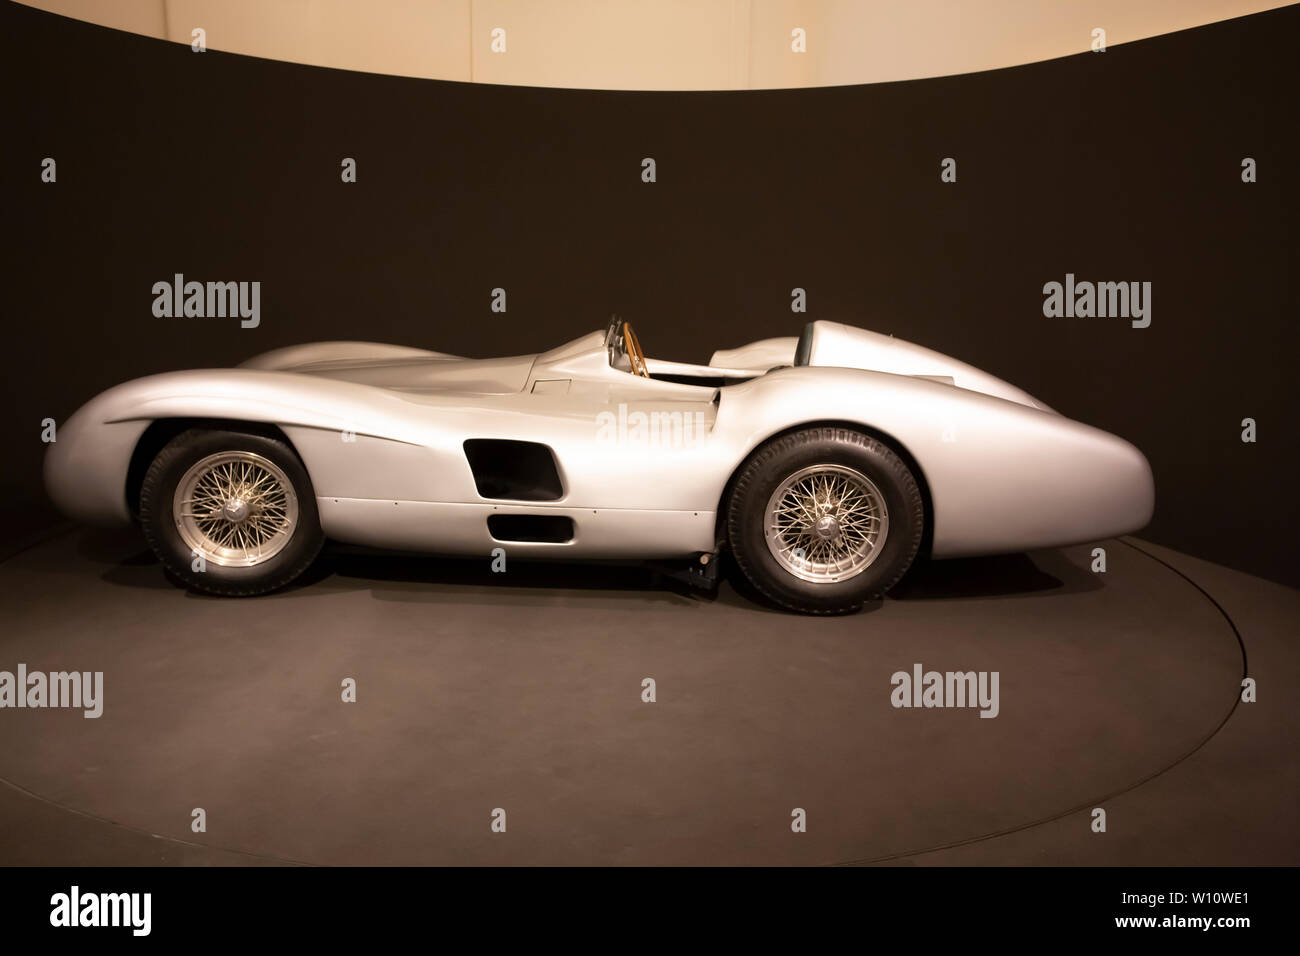 1950s Futuristic Mercedes Silver Arrow Grand Prix Racing Car driven by legend Stirling Moss.Top speed of 300km/h from 2.5 liter 8 cylinder engine. Stock Photo